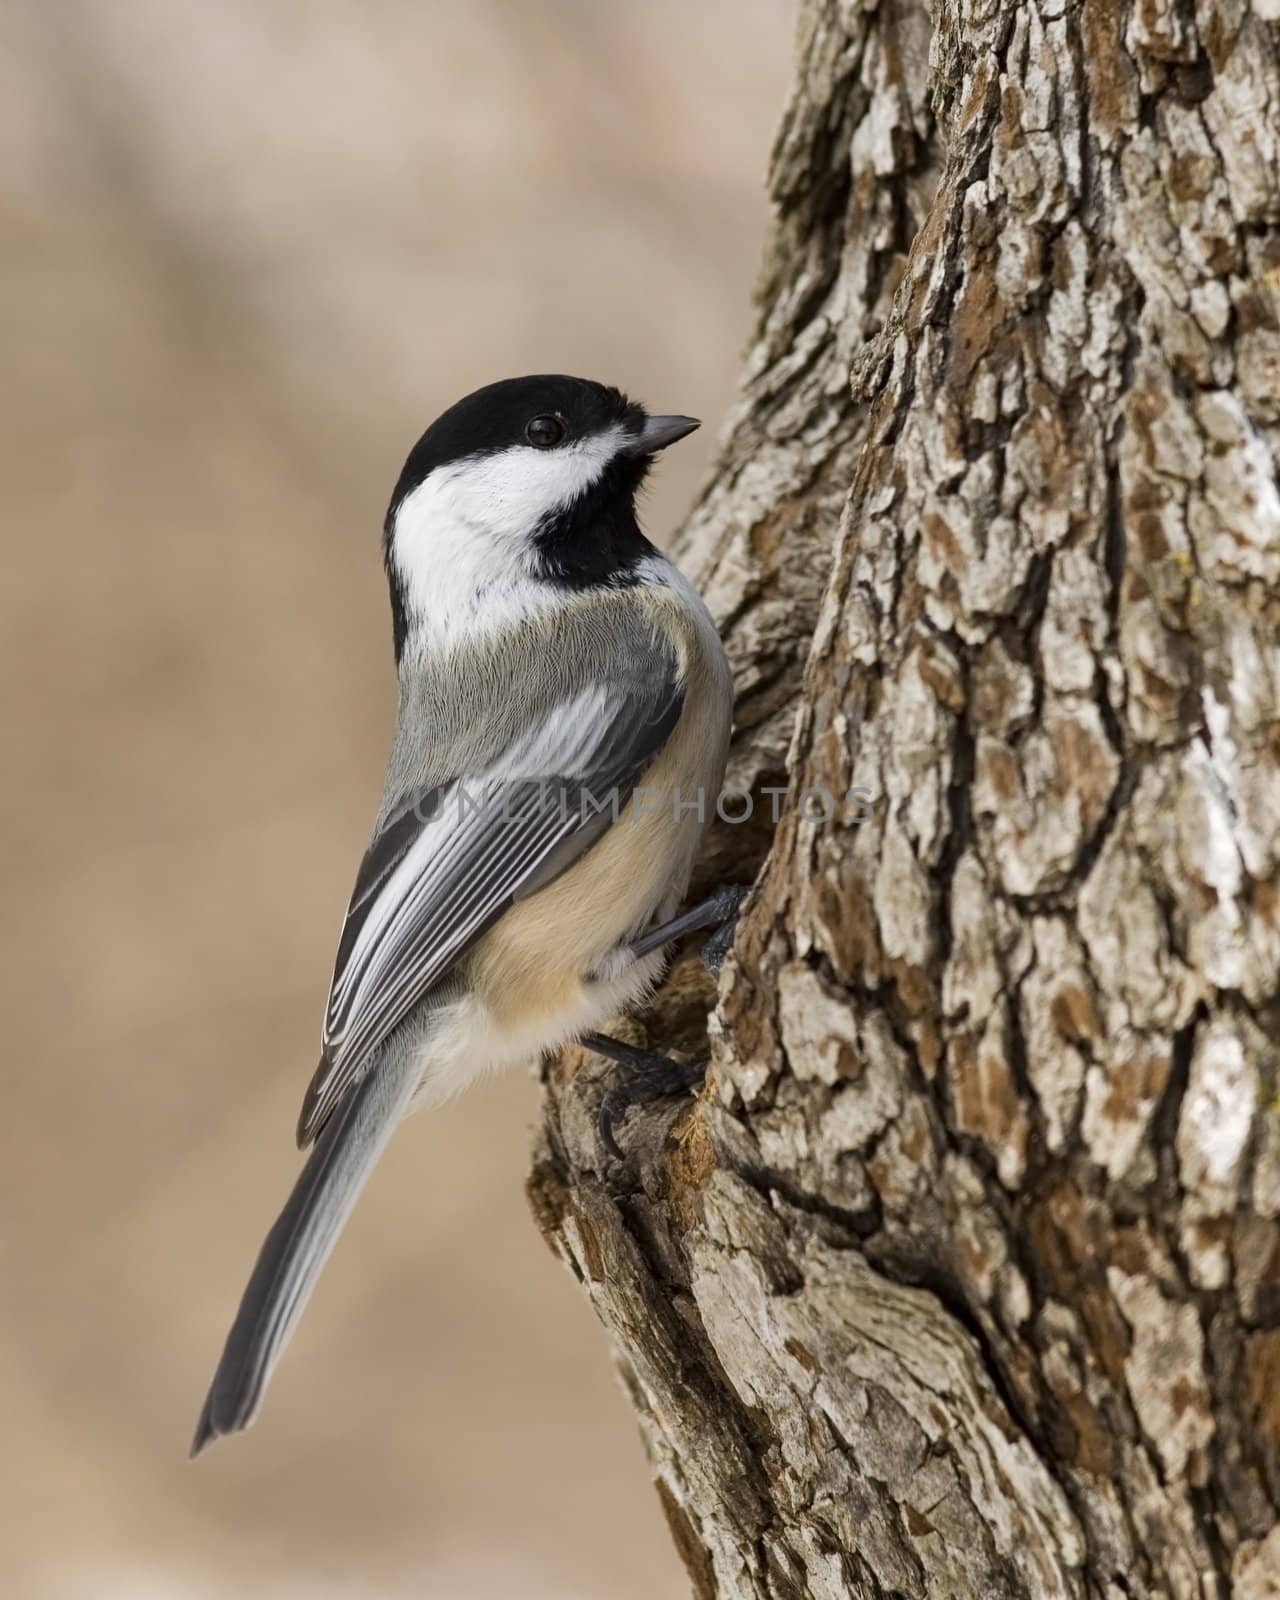 Black-capped Chickadee (Parus atricapillus) by brm1949